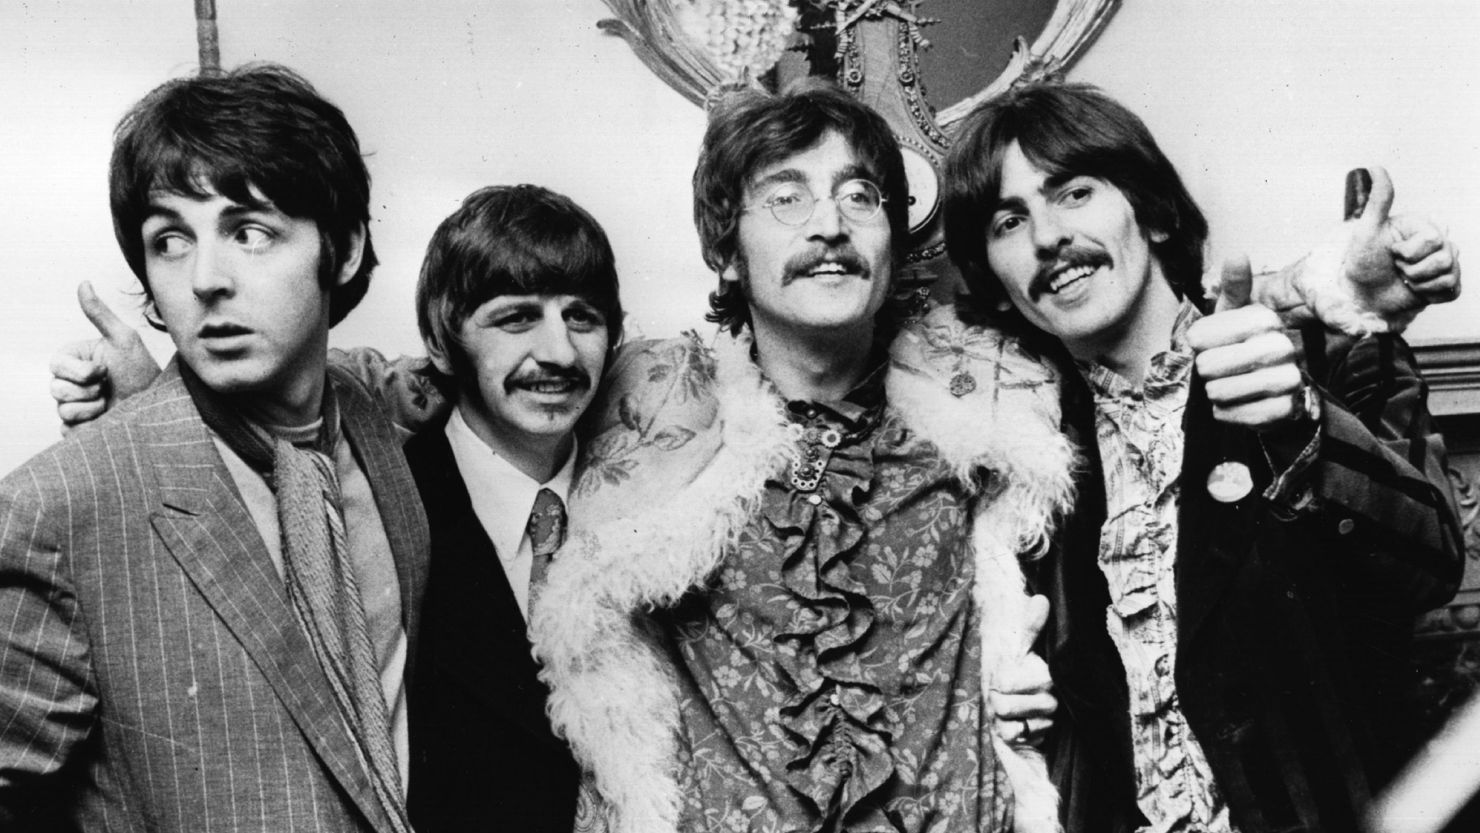 The Beatles break UK chart records as 'Now and Then' becomes No. 1 single